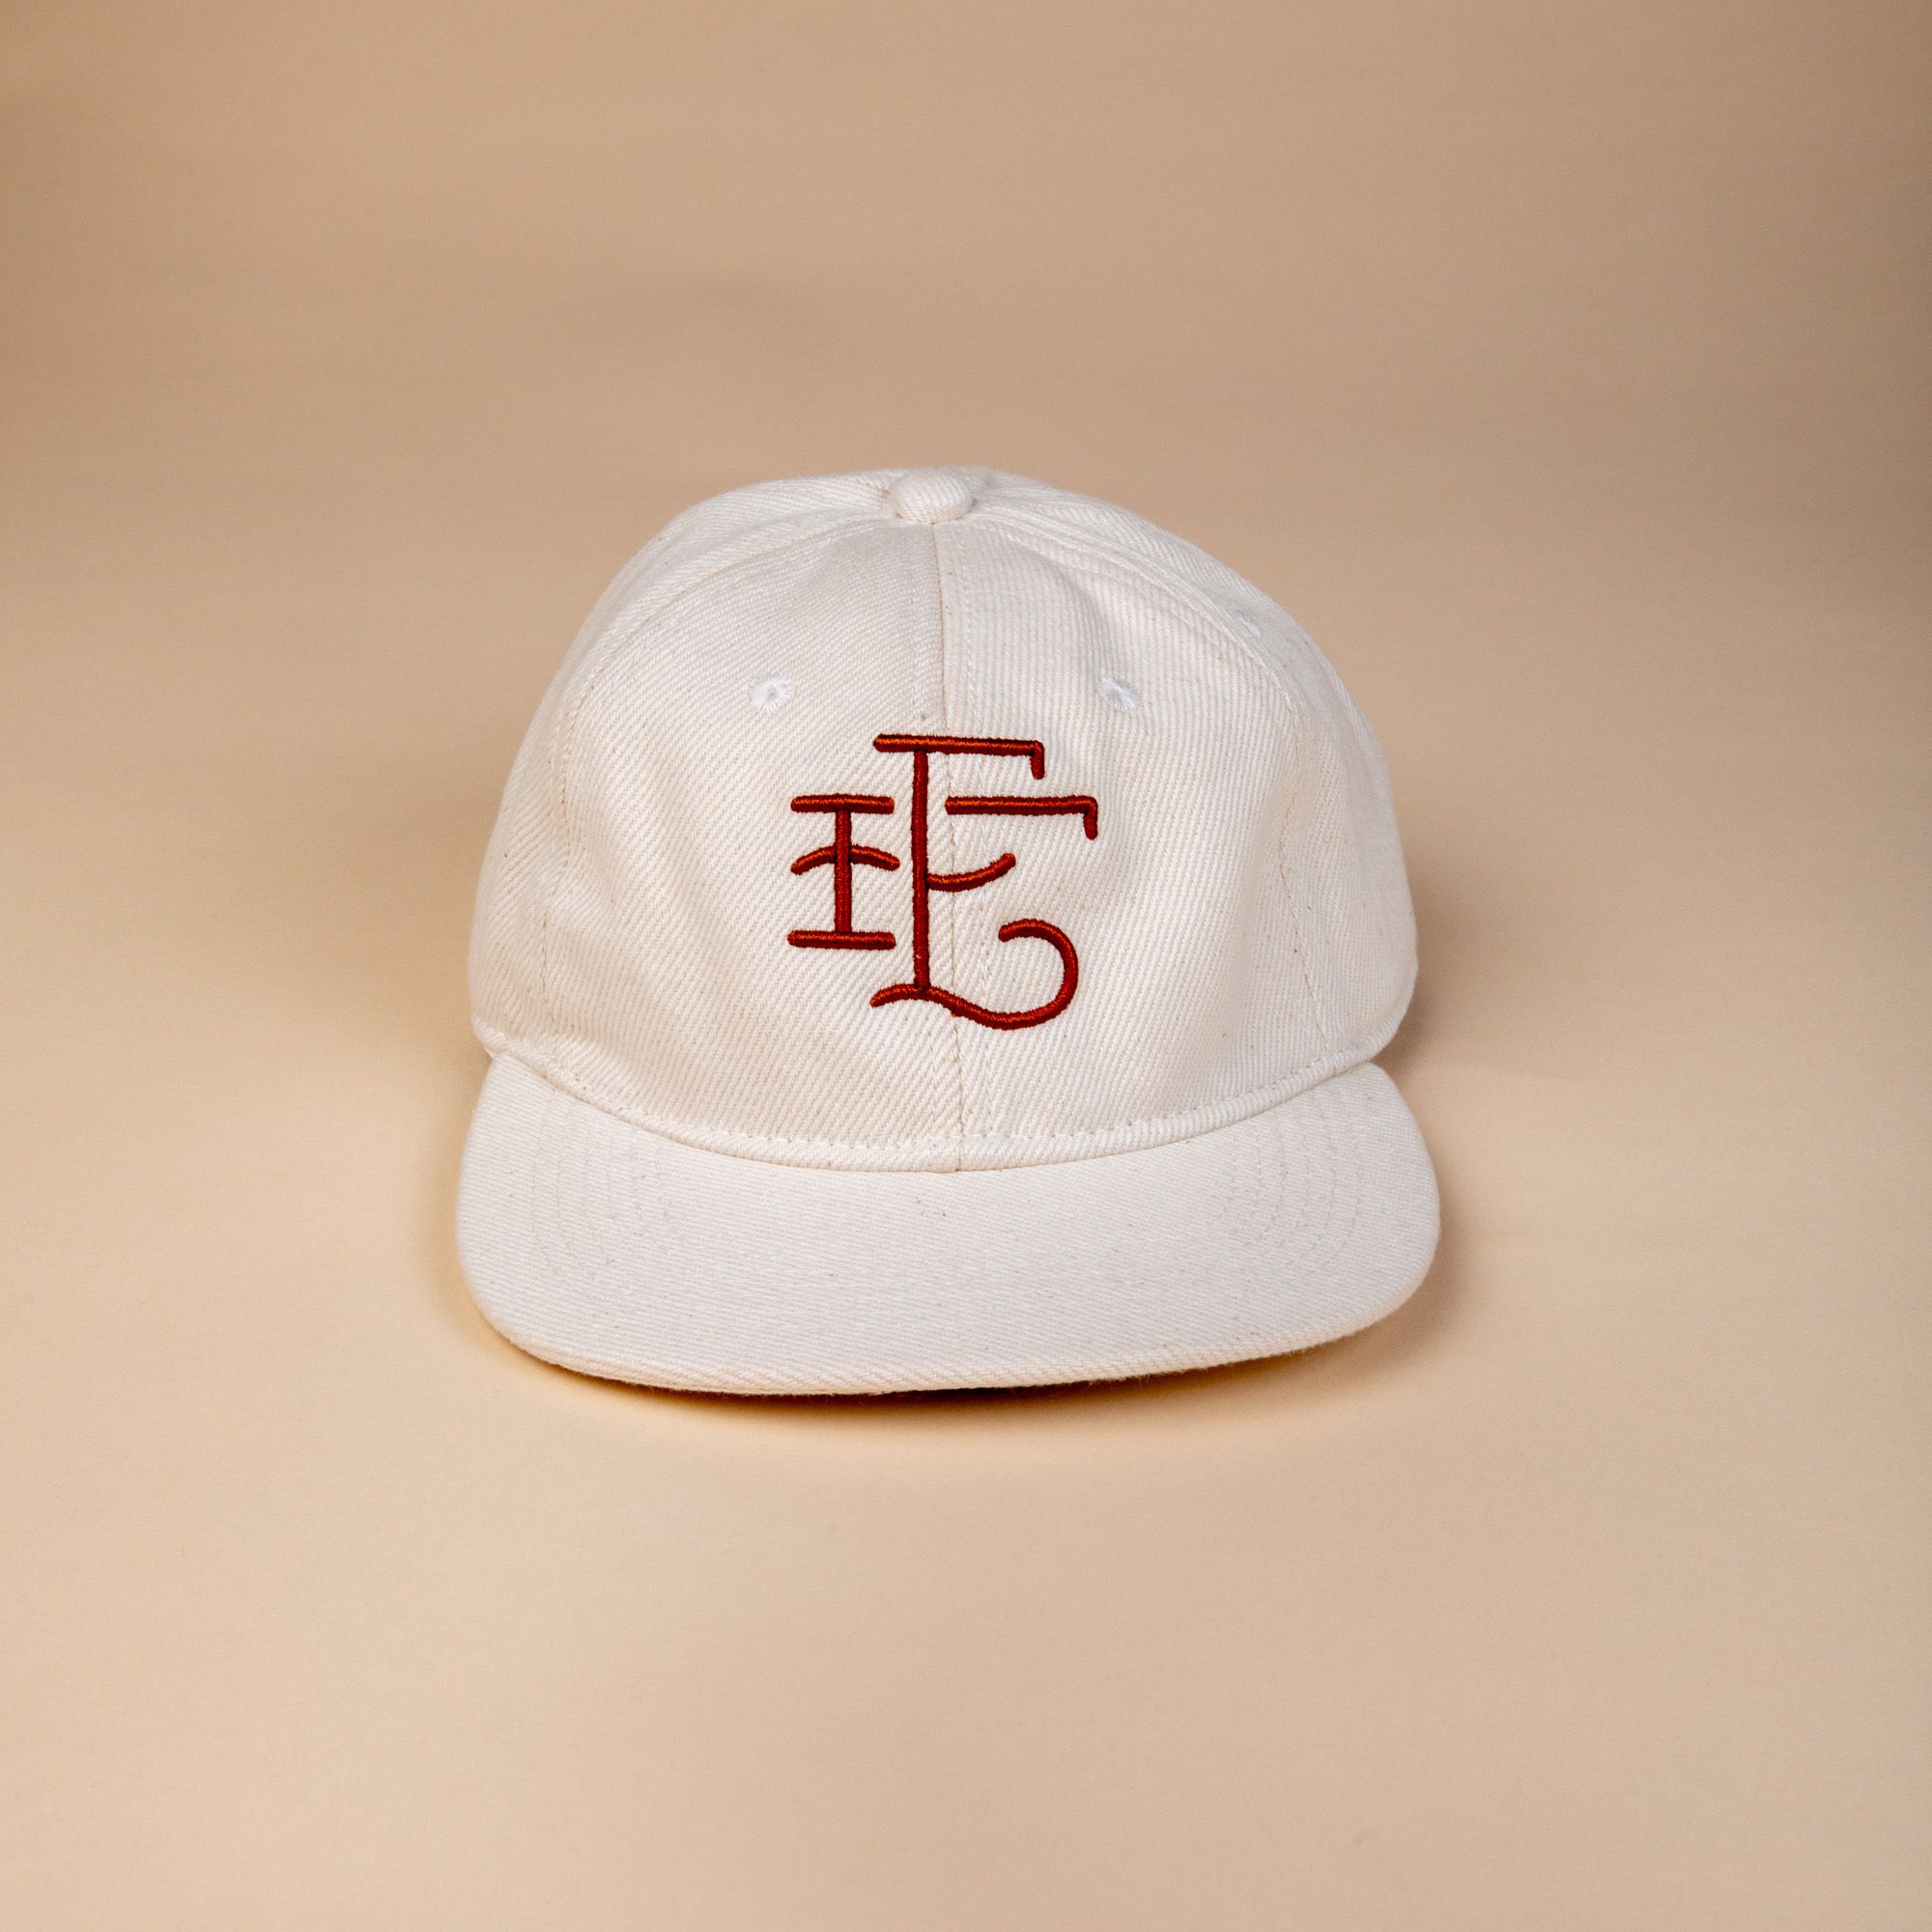 White denim baseball hat with a burnt terracotta stitching of East Fork's logo in a simple cursive - 'EF'.